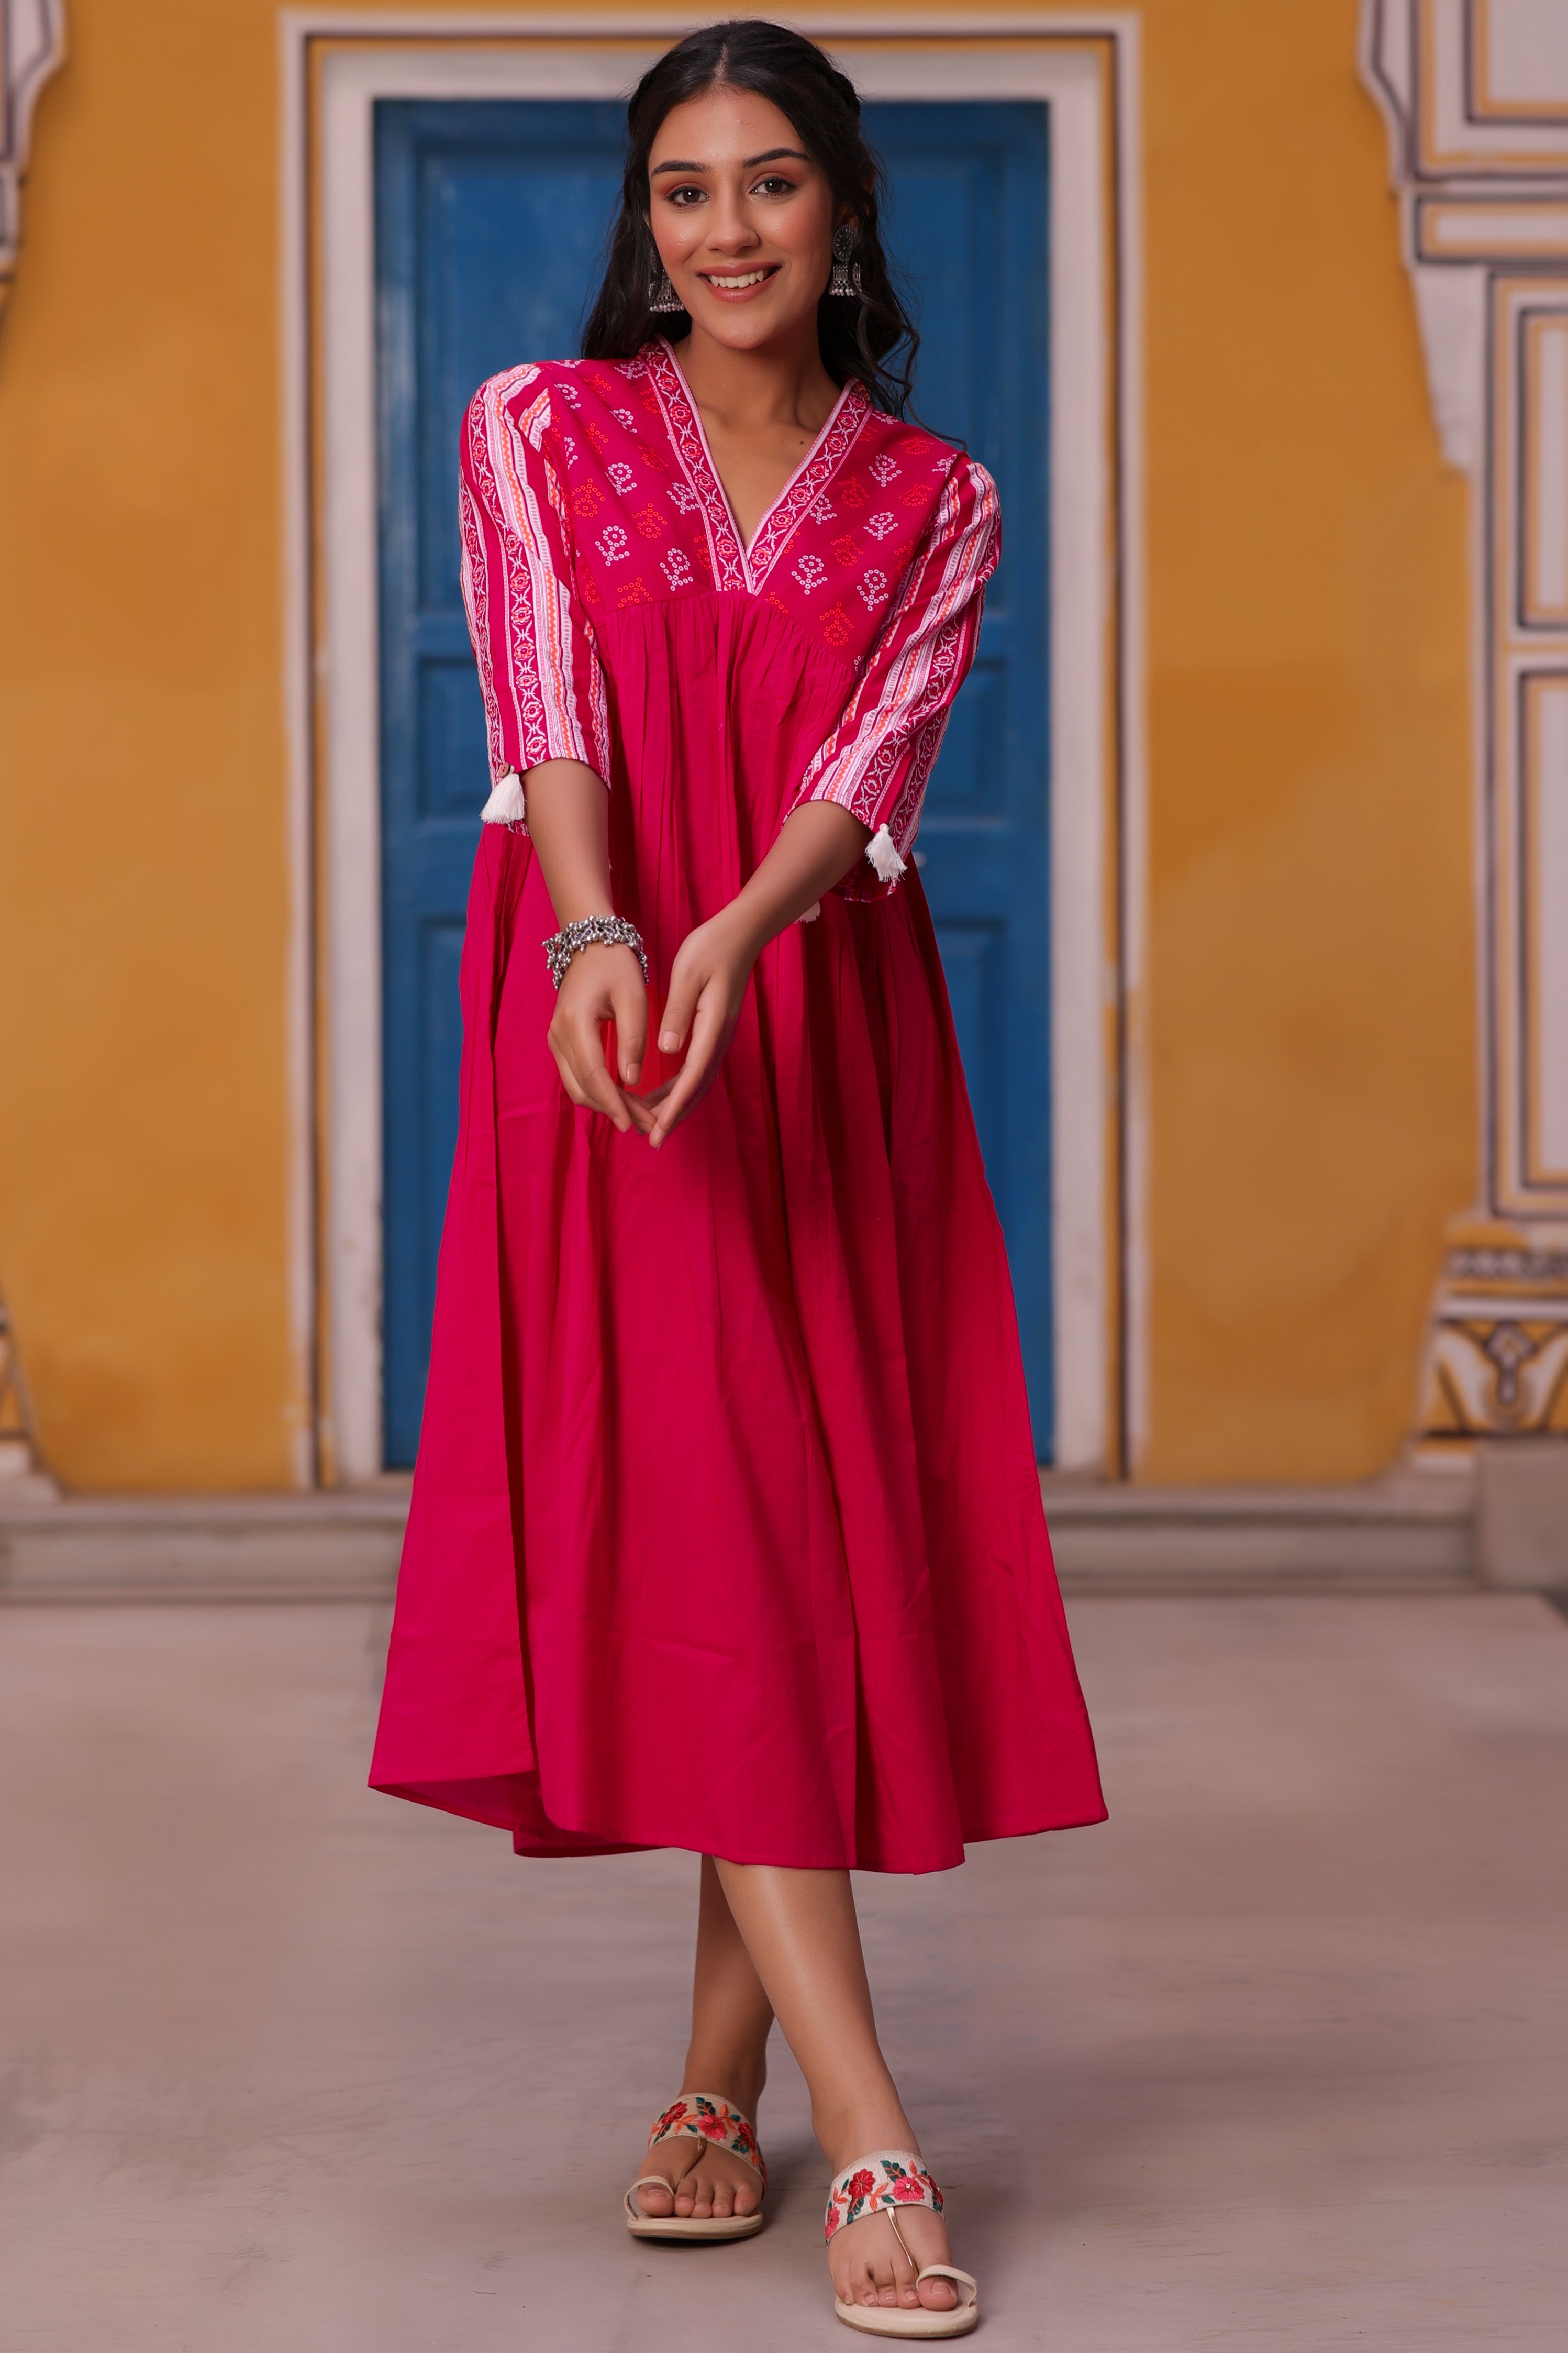 this-pink-cotton-printed-v-neck-gathered-flared-a-line-dress-is-a-smart-casual-range-with-very-comfortable-functional-and-detail-oriented-smart-silhouettes-which-can-be-worn-at-work-or-any-day-out-with-friends